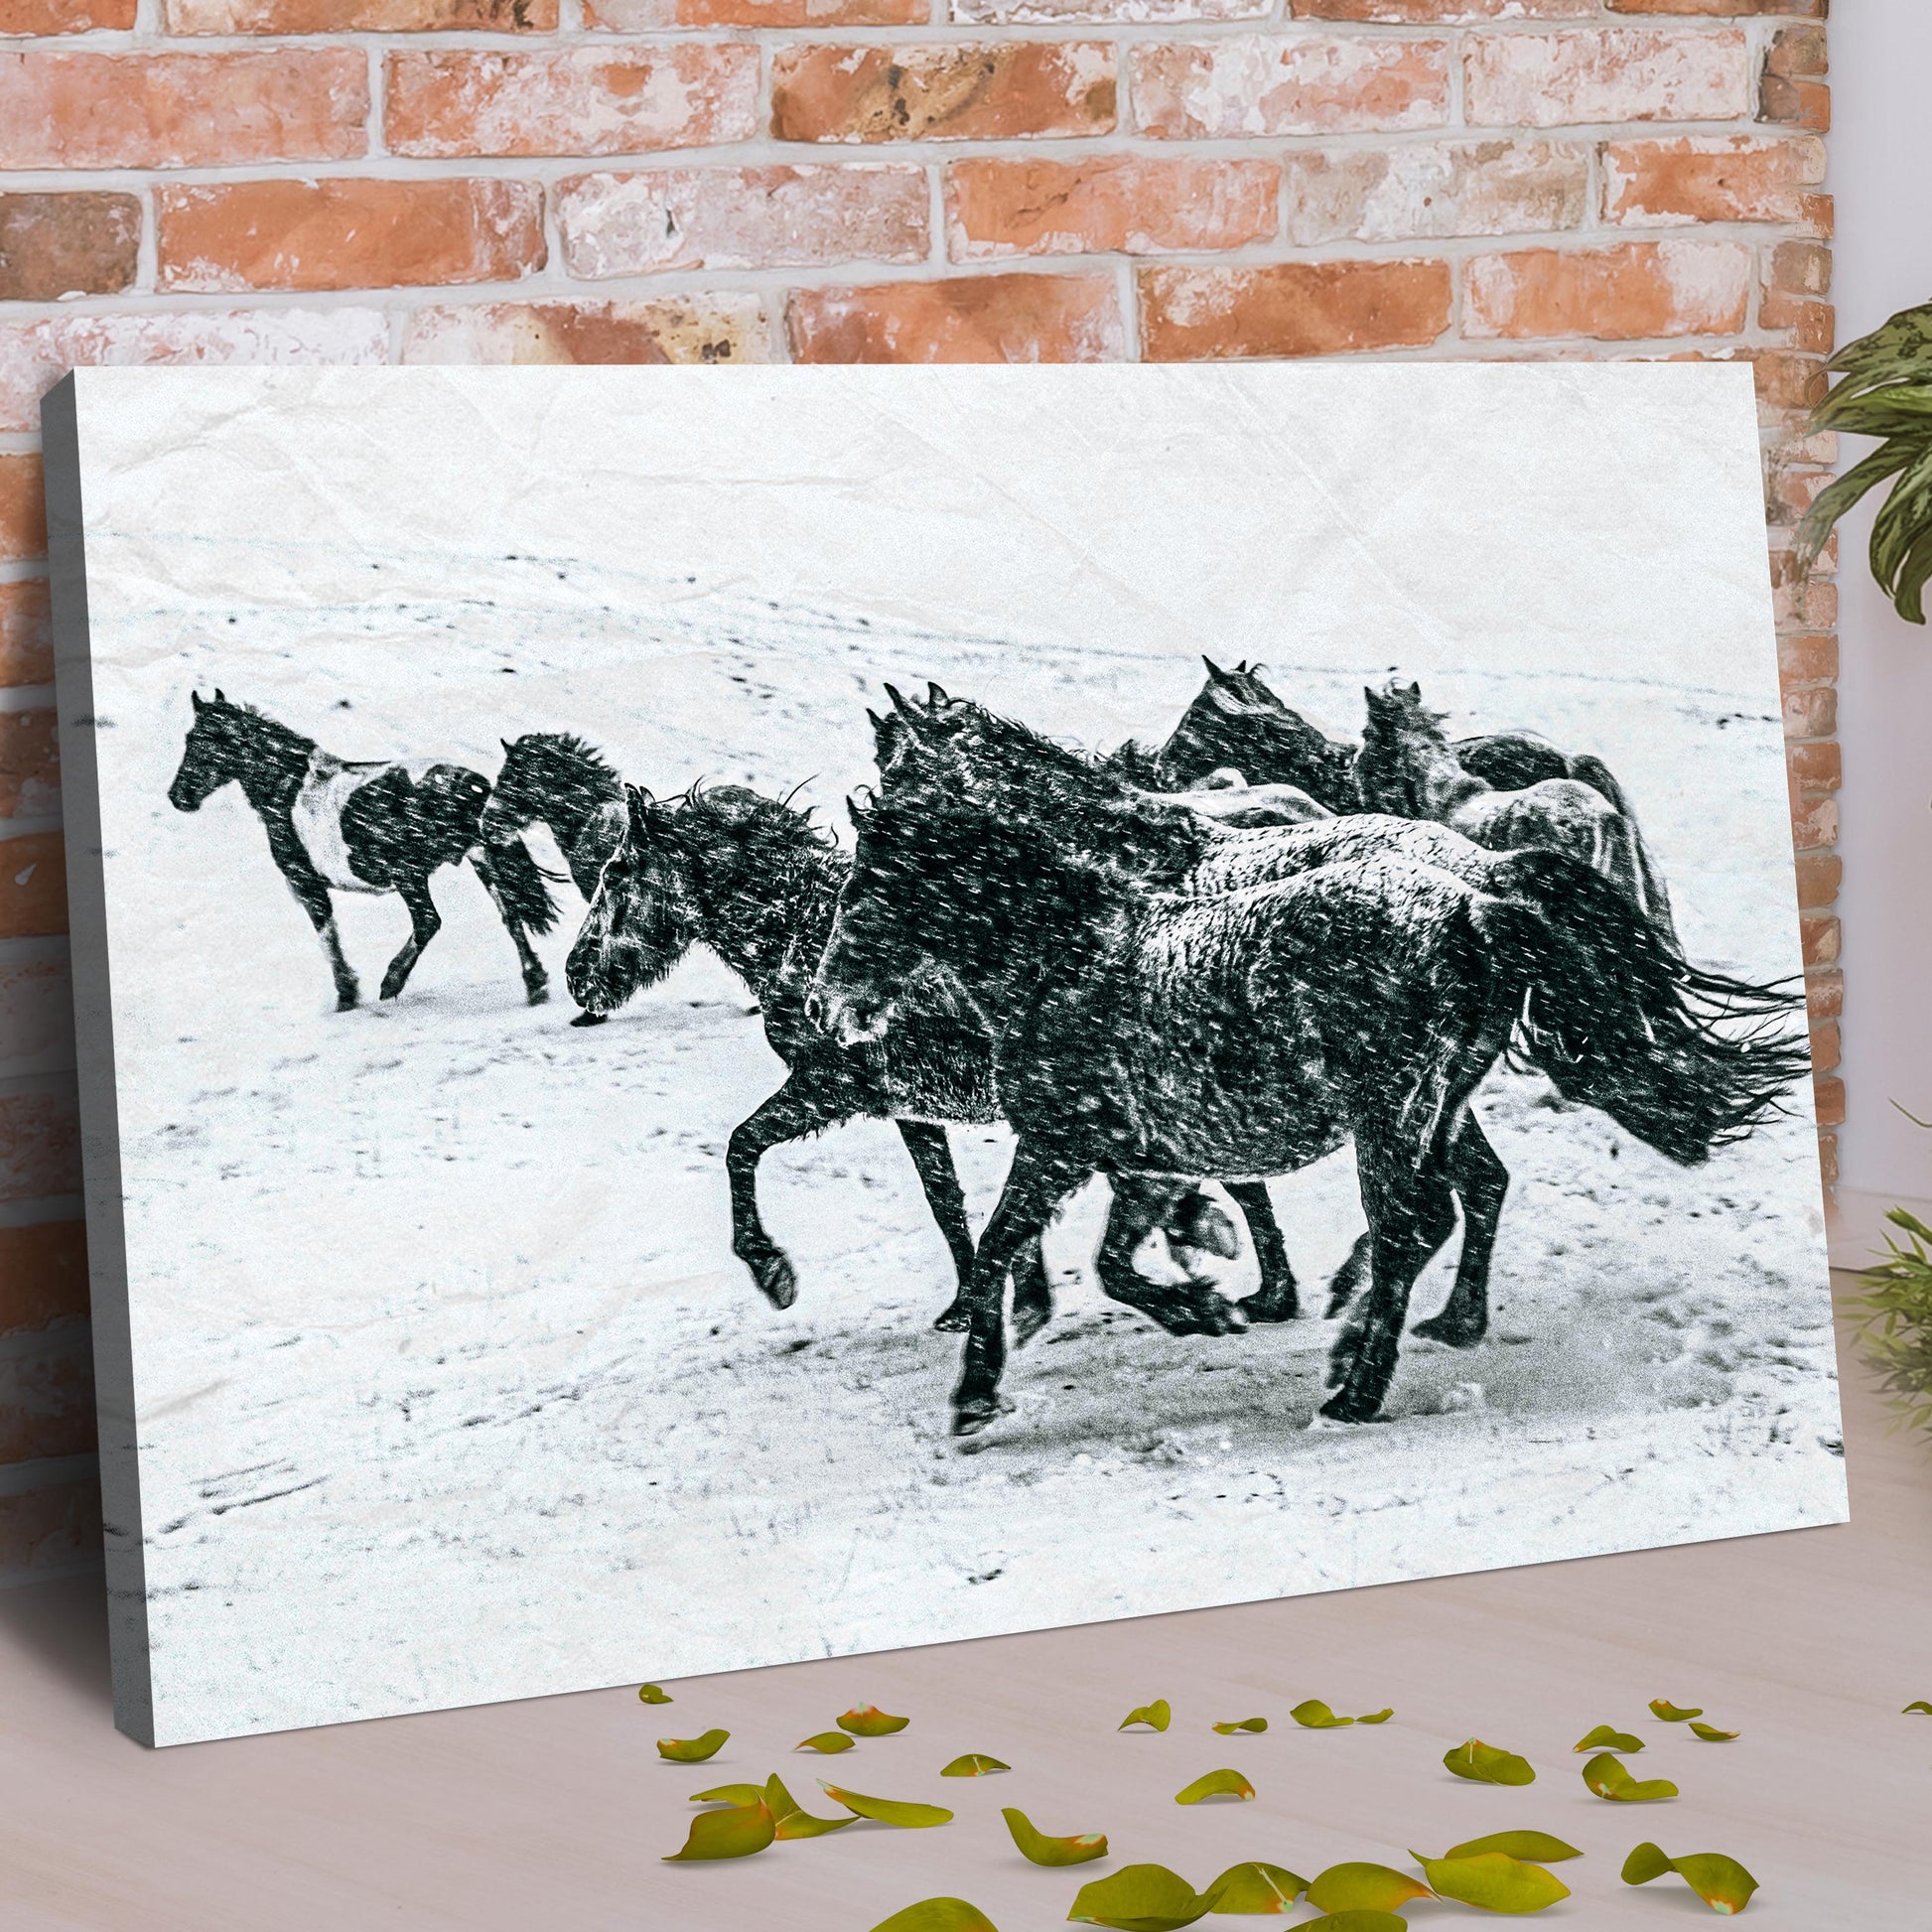 Horses In Snow Canvas Wall Art Style 1 - Image by Tailored Canvases